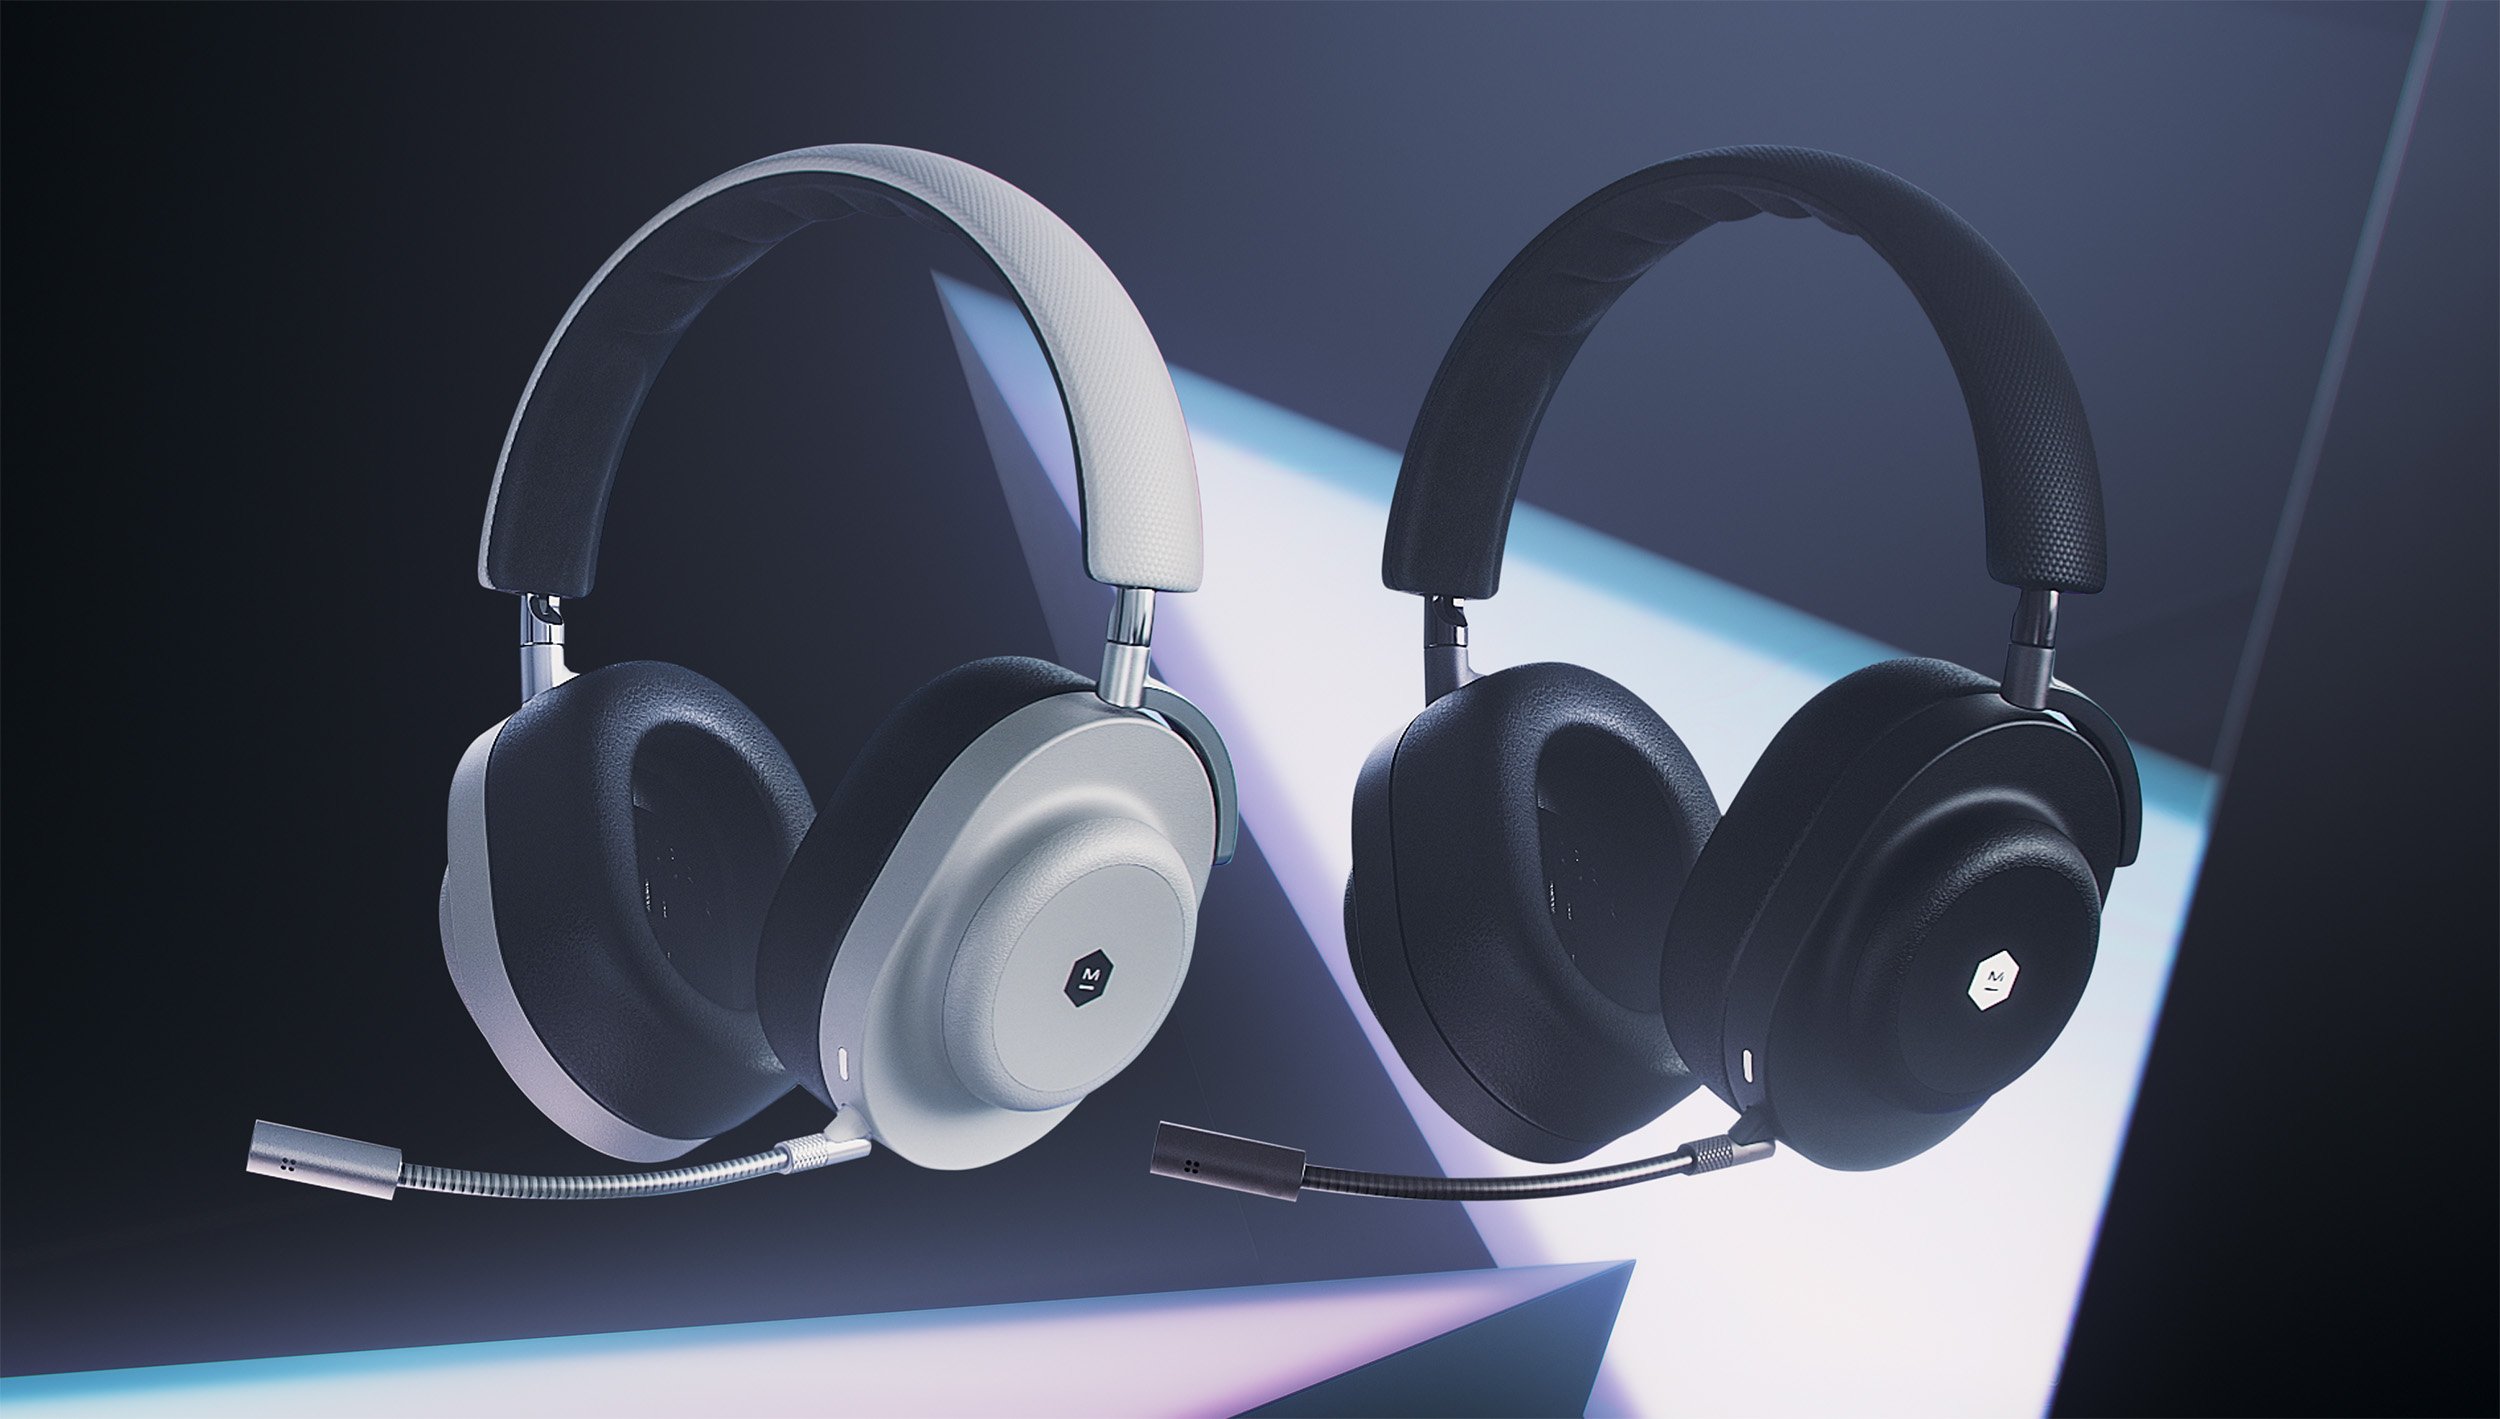 Know Your Sound Tool: MG20 Wireless Gaming Headphones